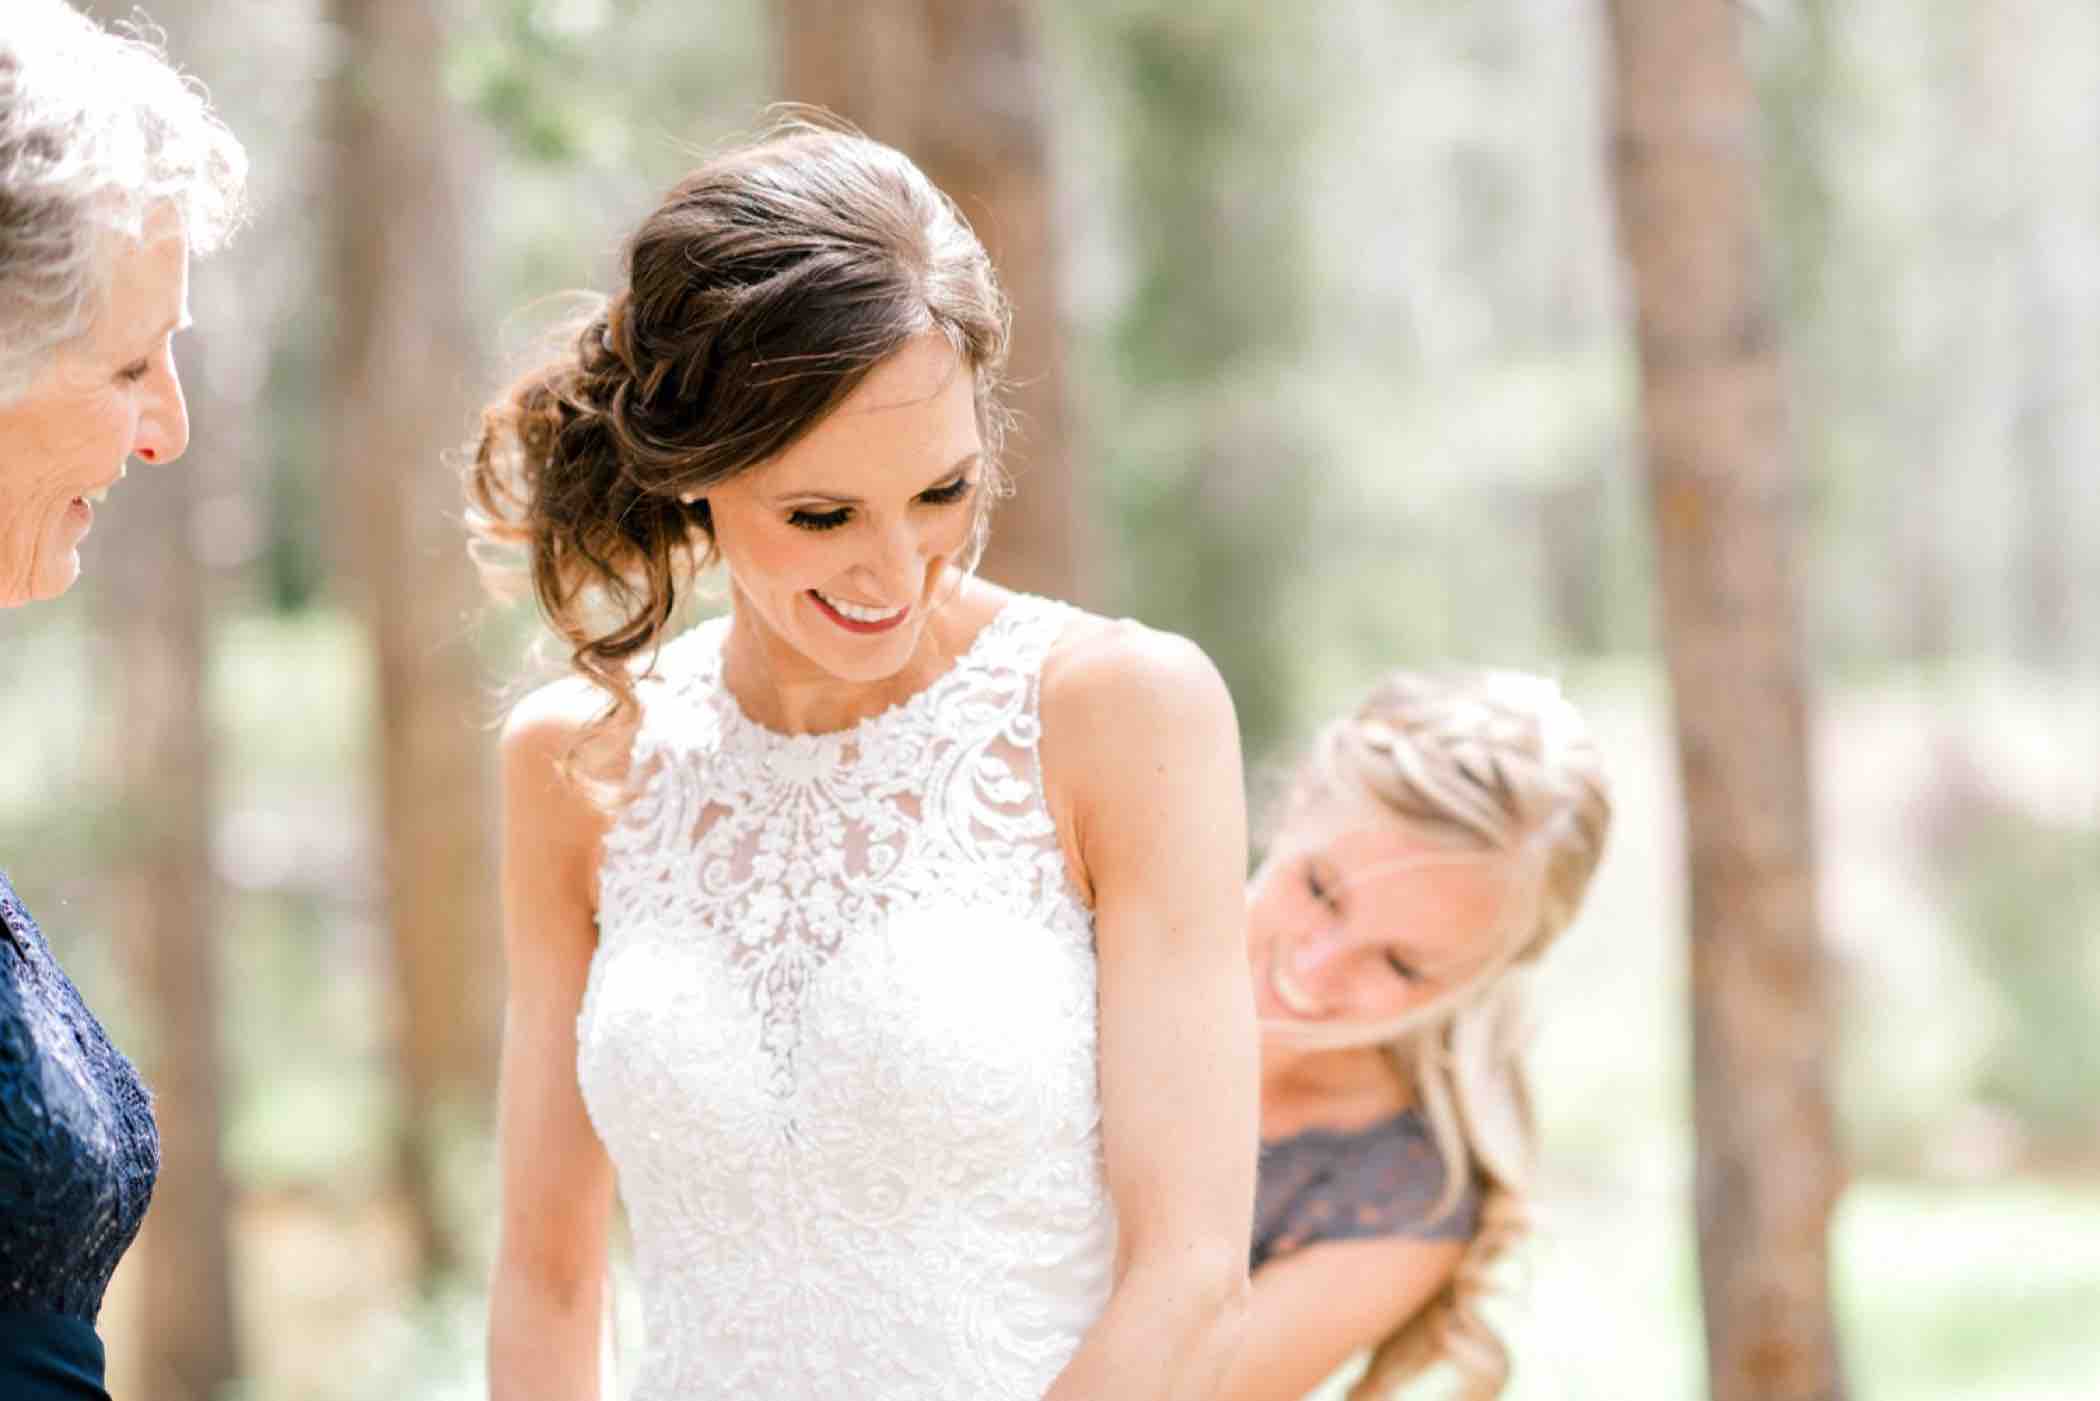 At Piney River Ranch in Vail, Sallie was an adventurous bride who chose to get ready outdoors and put her wedding dress outside. Photo by Ali and Garrett, Romantic, Adventurous, Nostalgic Wedding Photographers.